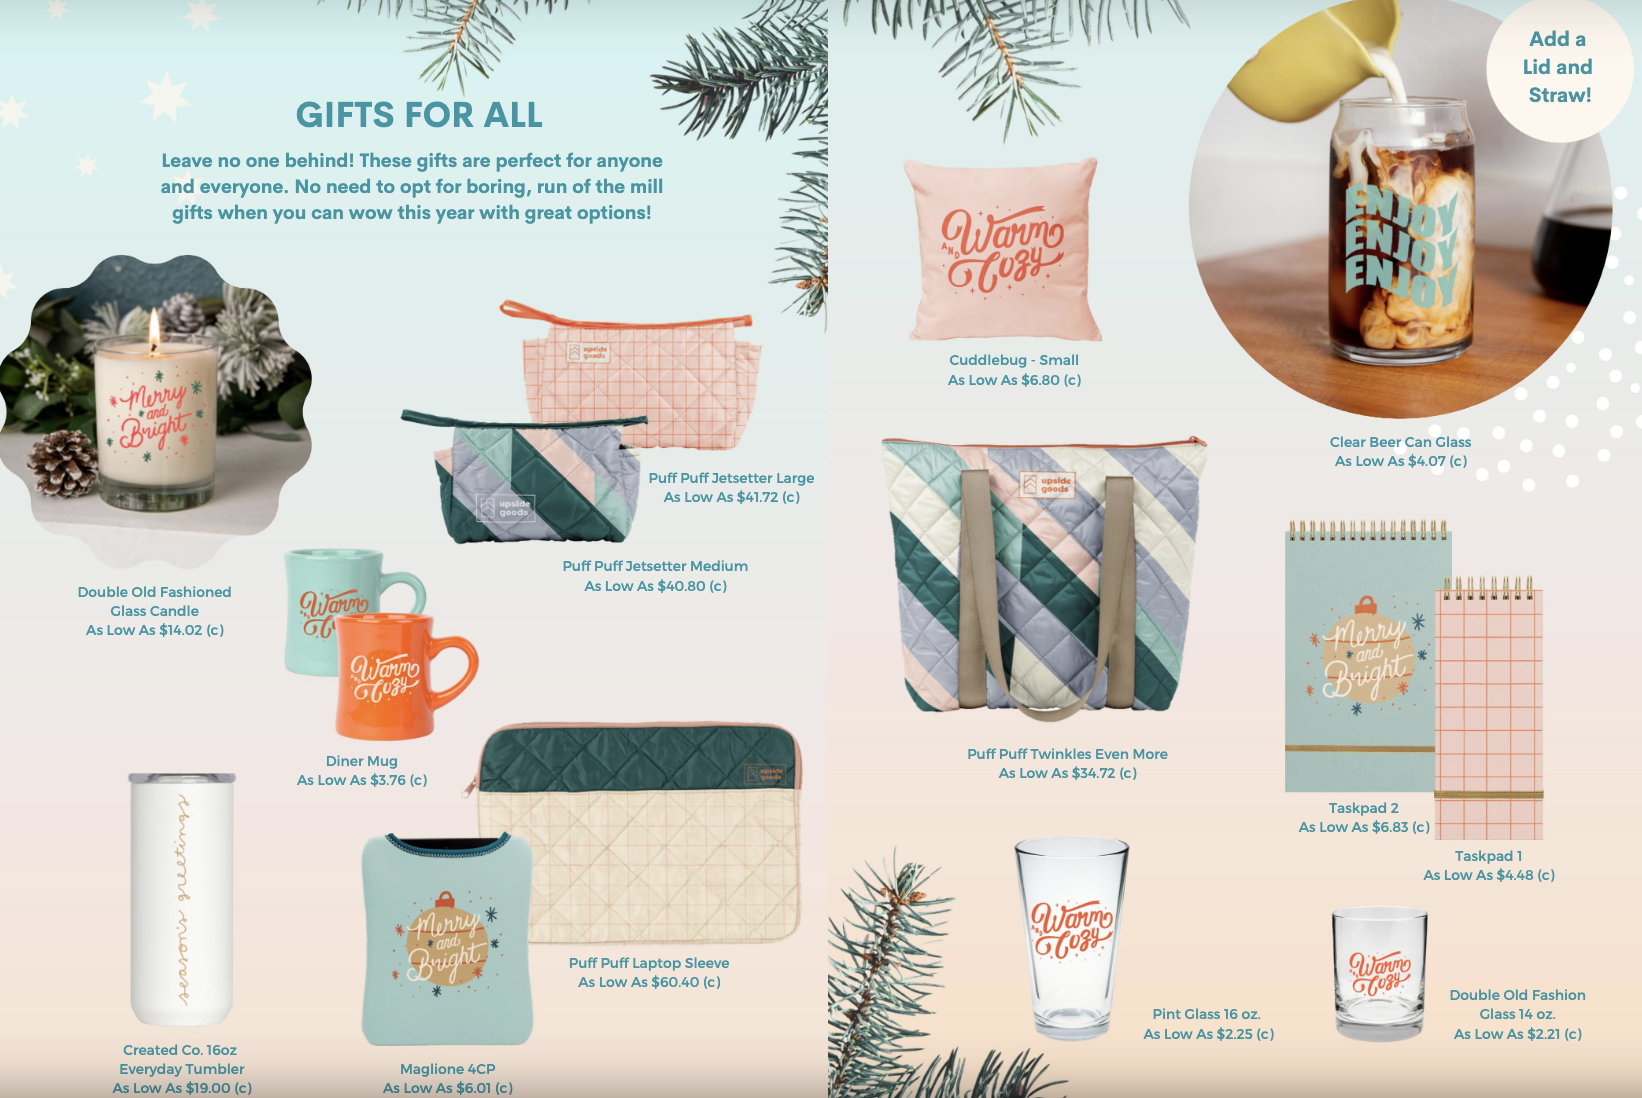 Branded Gifts for All